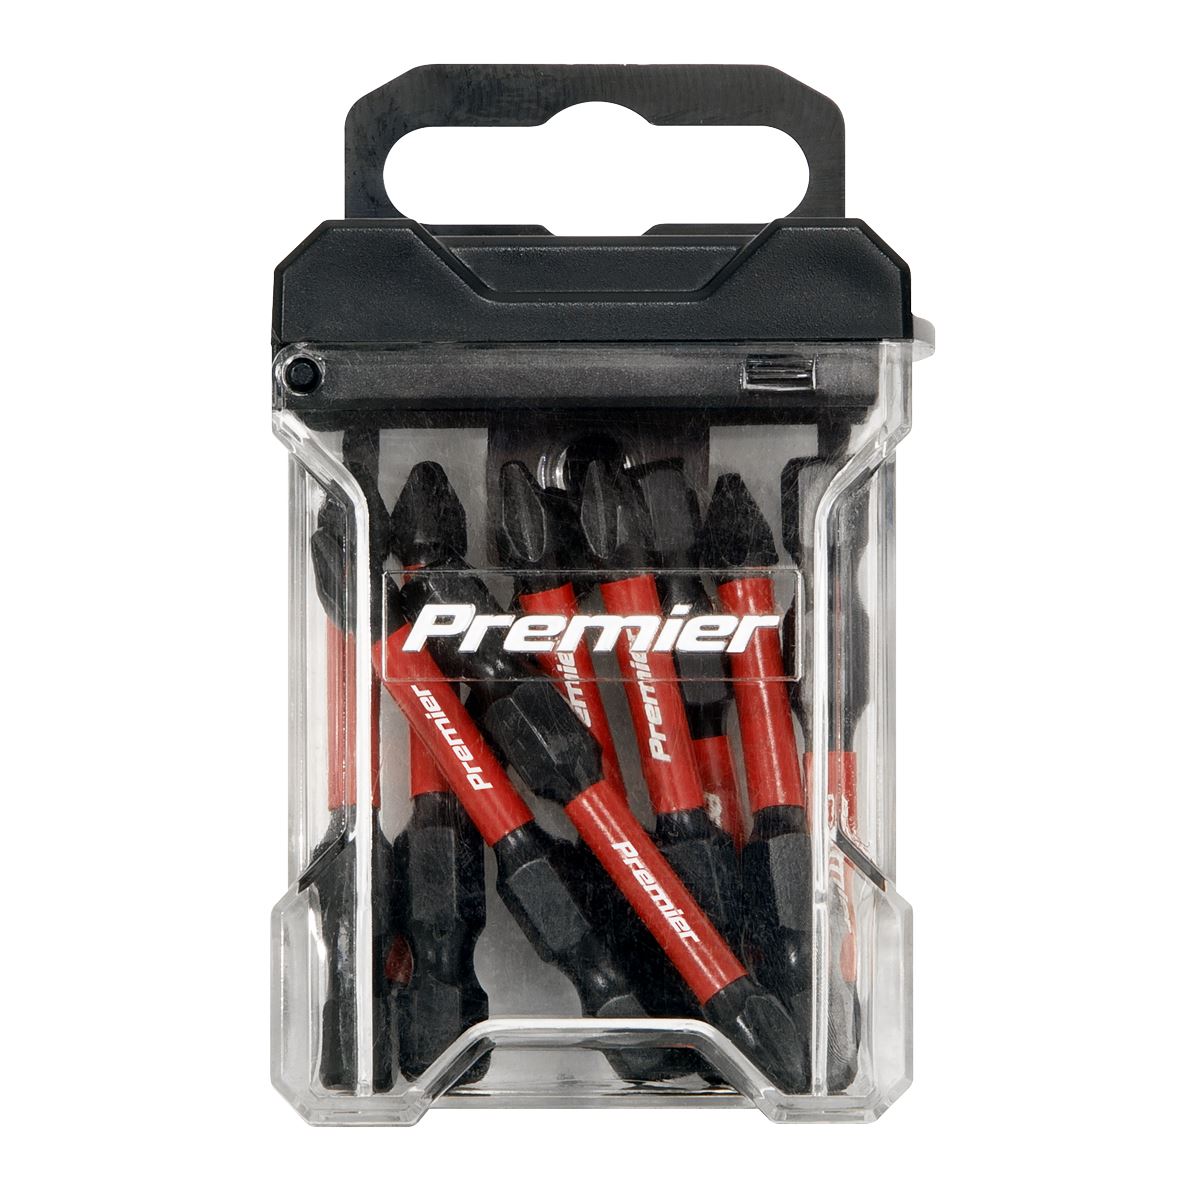 Sealey Premier Phillips #2 Impact Power Tool Bits 50mm - 10pc